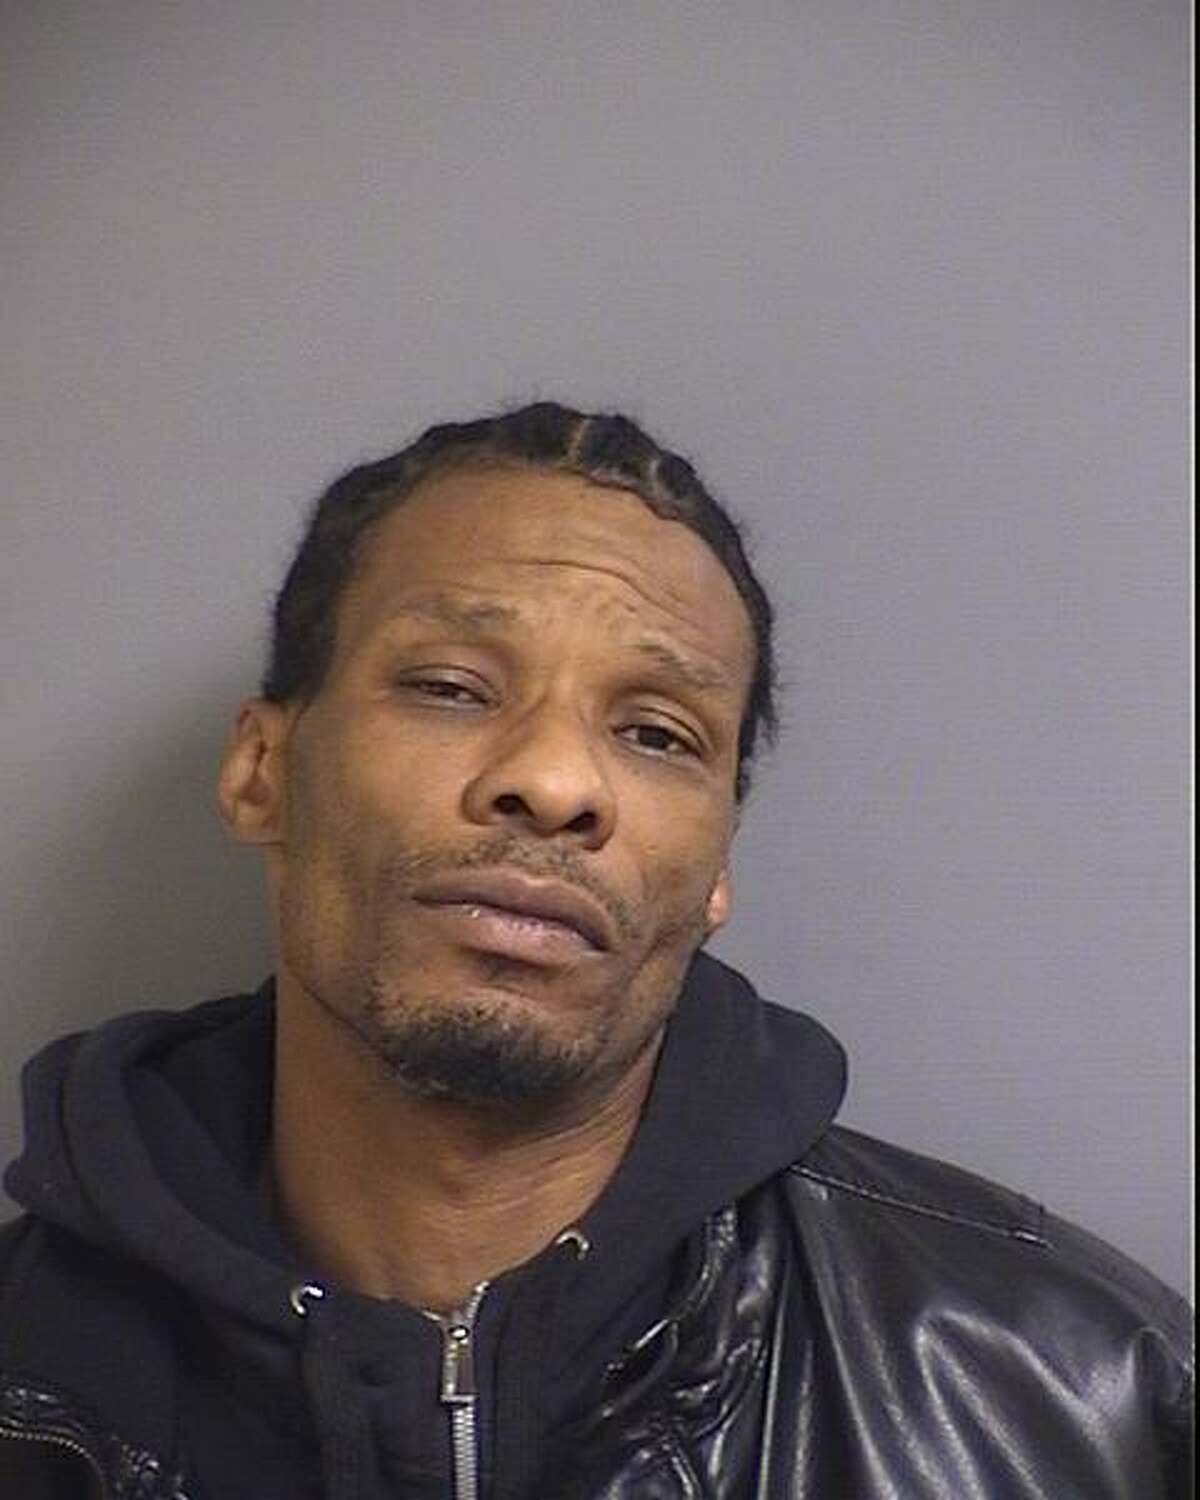 Police in Coralville arrested Telly Shadell Corey, 41, on Sunday and charged him with indecent exposure, according to online jail records. Corey allegedly exposed himself to a female passenger on a Megabus trip for three hours.